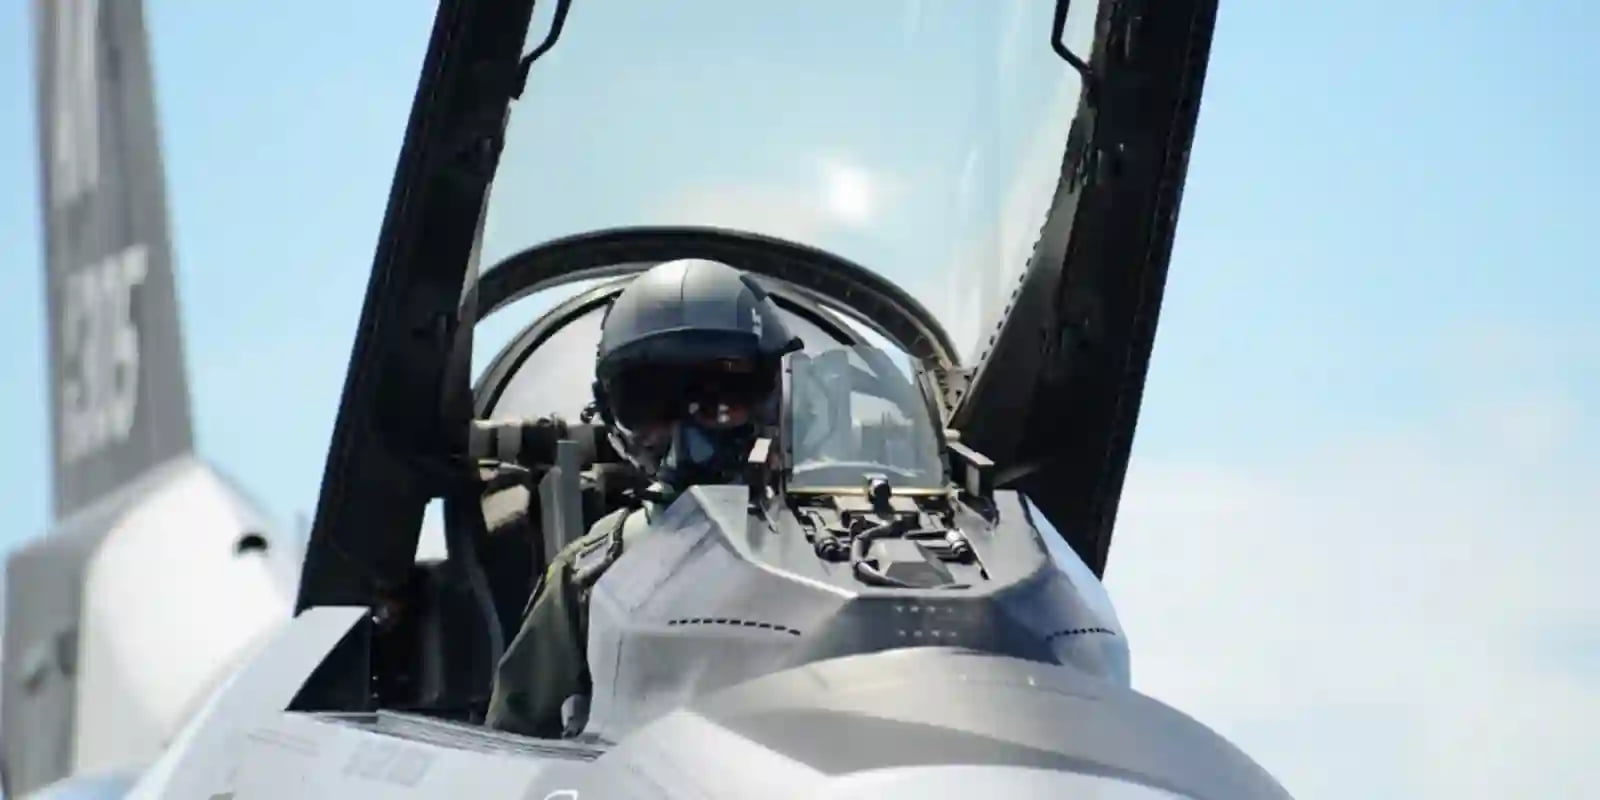 How to Make $50,000 as an Air Force Pilot by Sept. 15, 2023